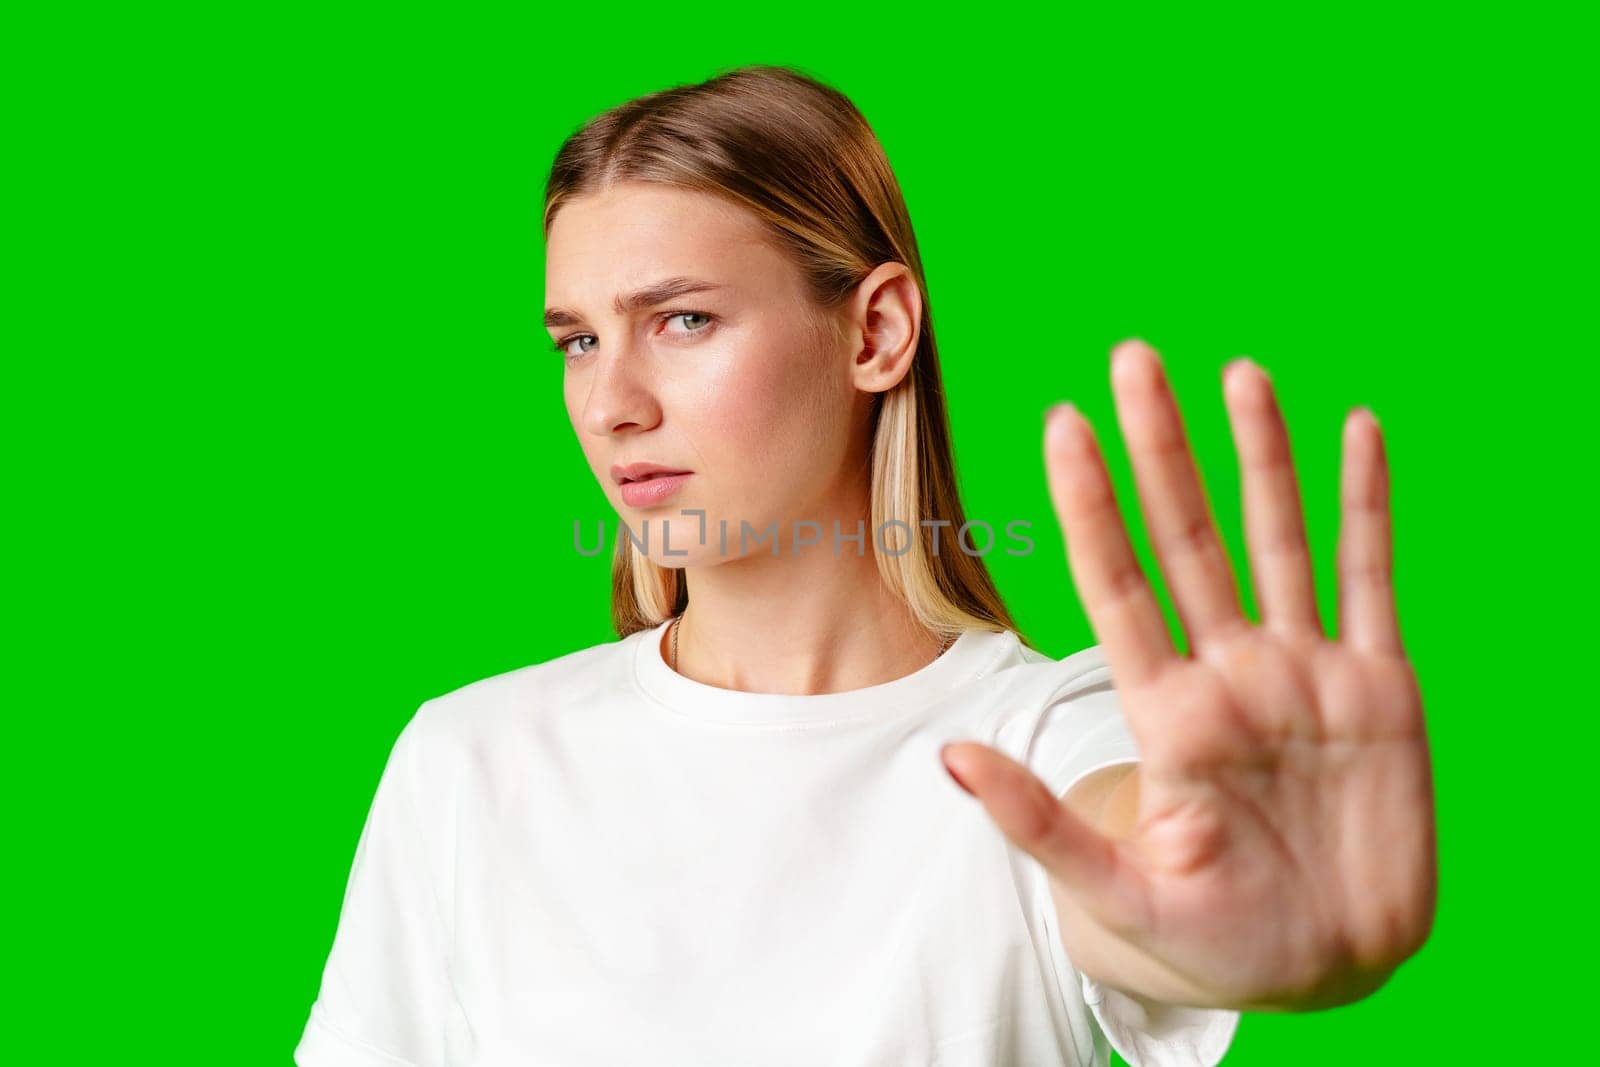 Young Woman Making Stop Sign Gesture on green background by Fabrikasimf